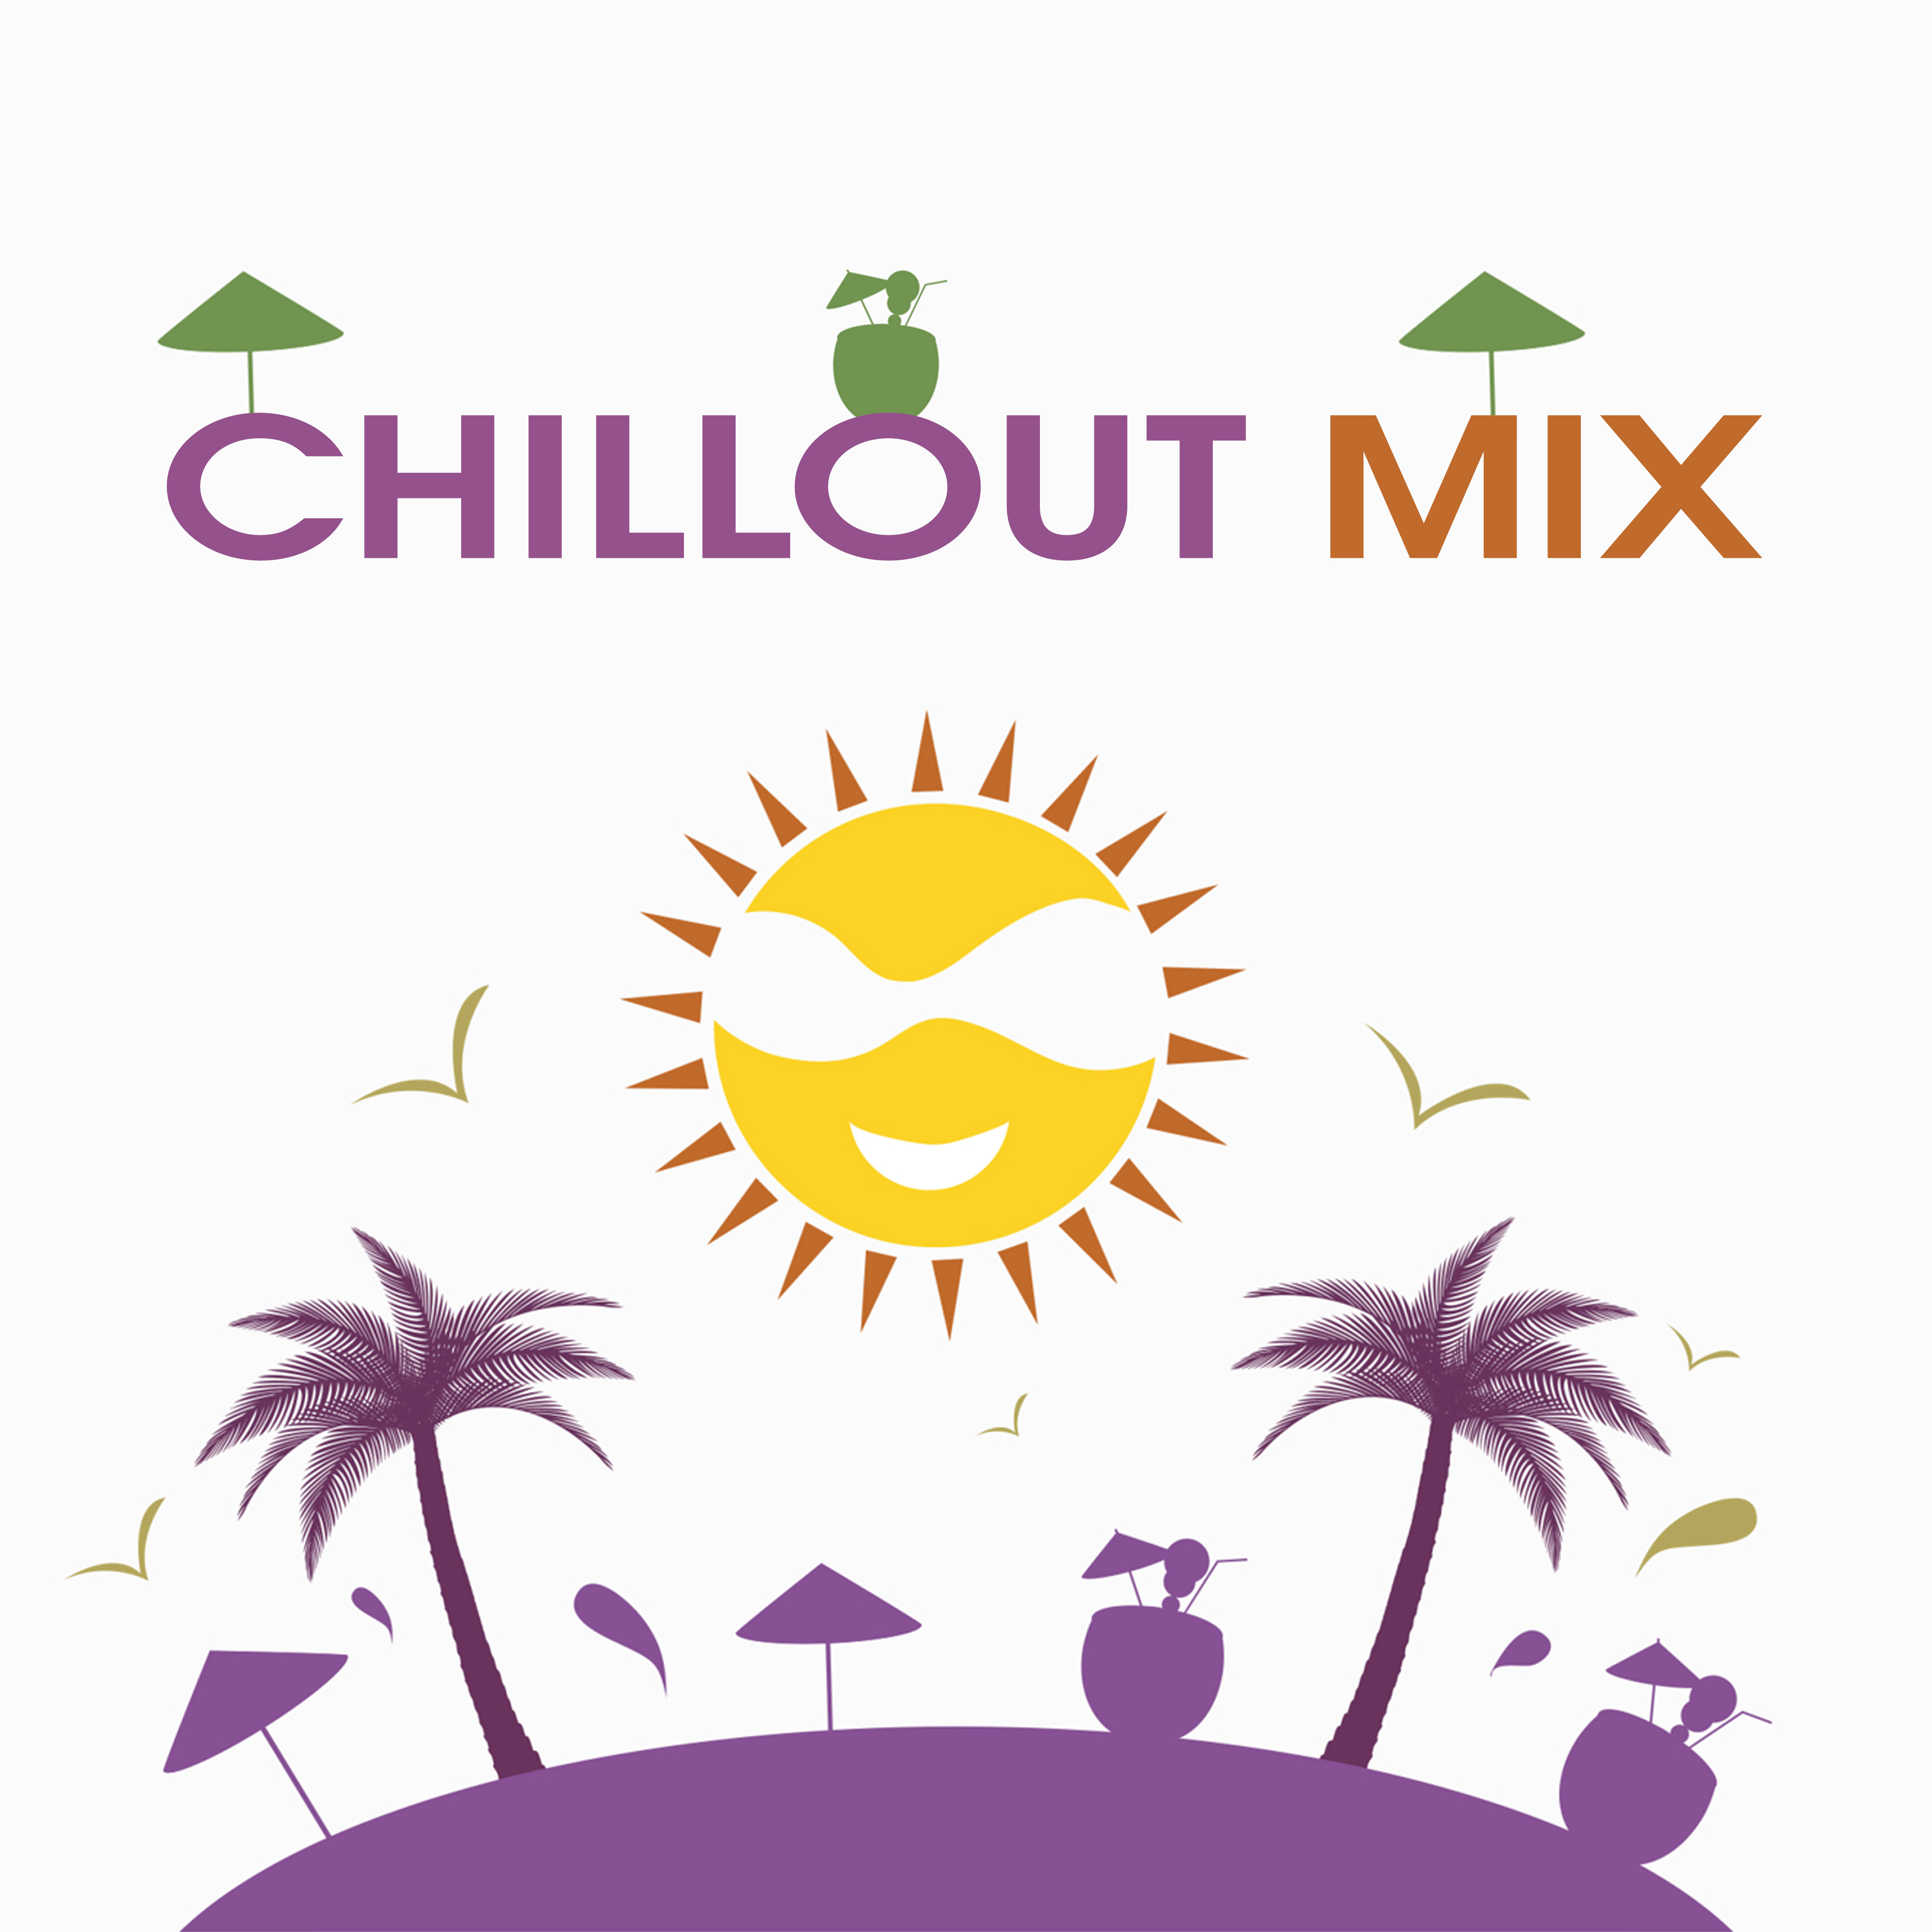 Chillout Mix  Summer Music, Lounge Tunes, Melodies to Rest, Deep Vibes, Relaxation